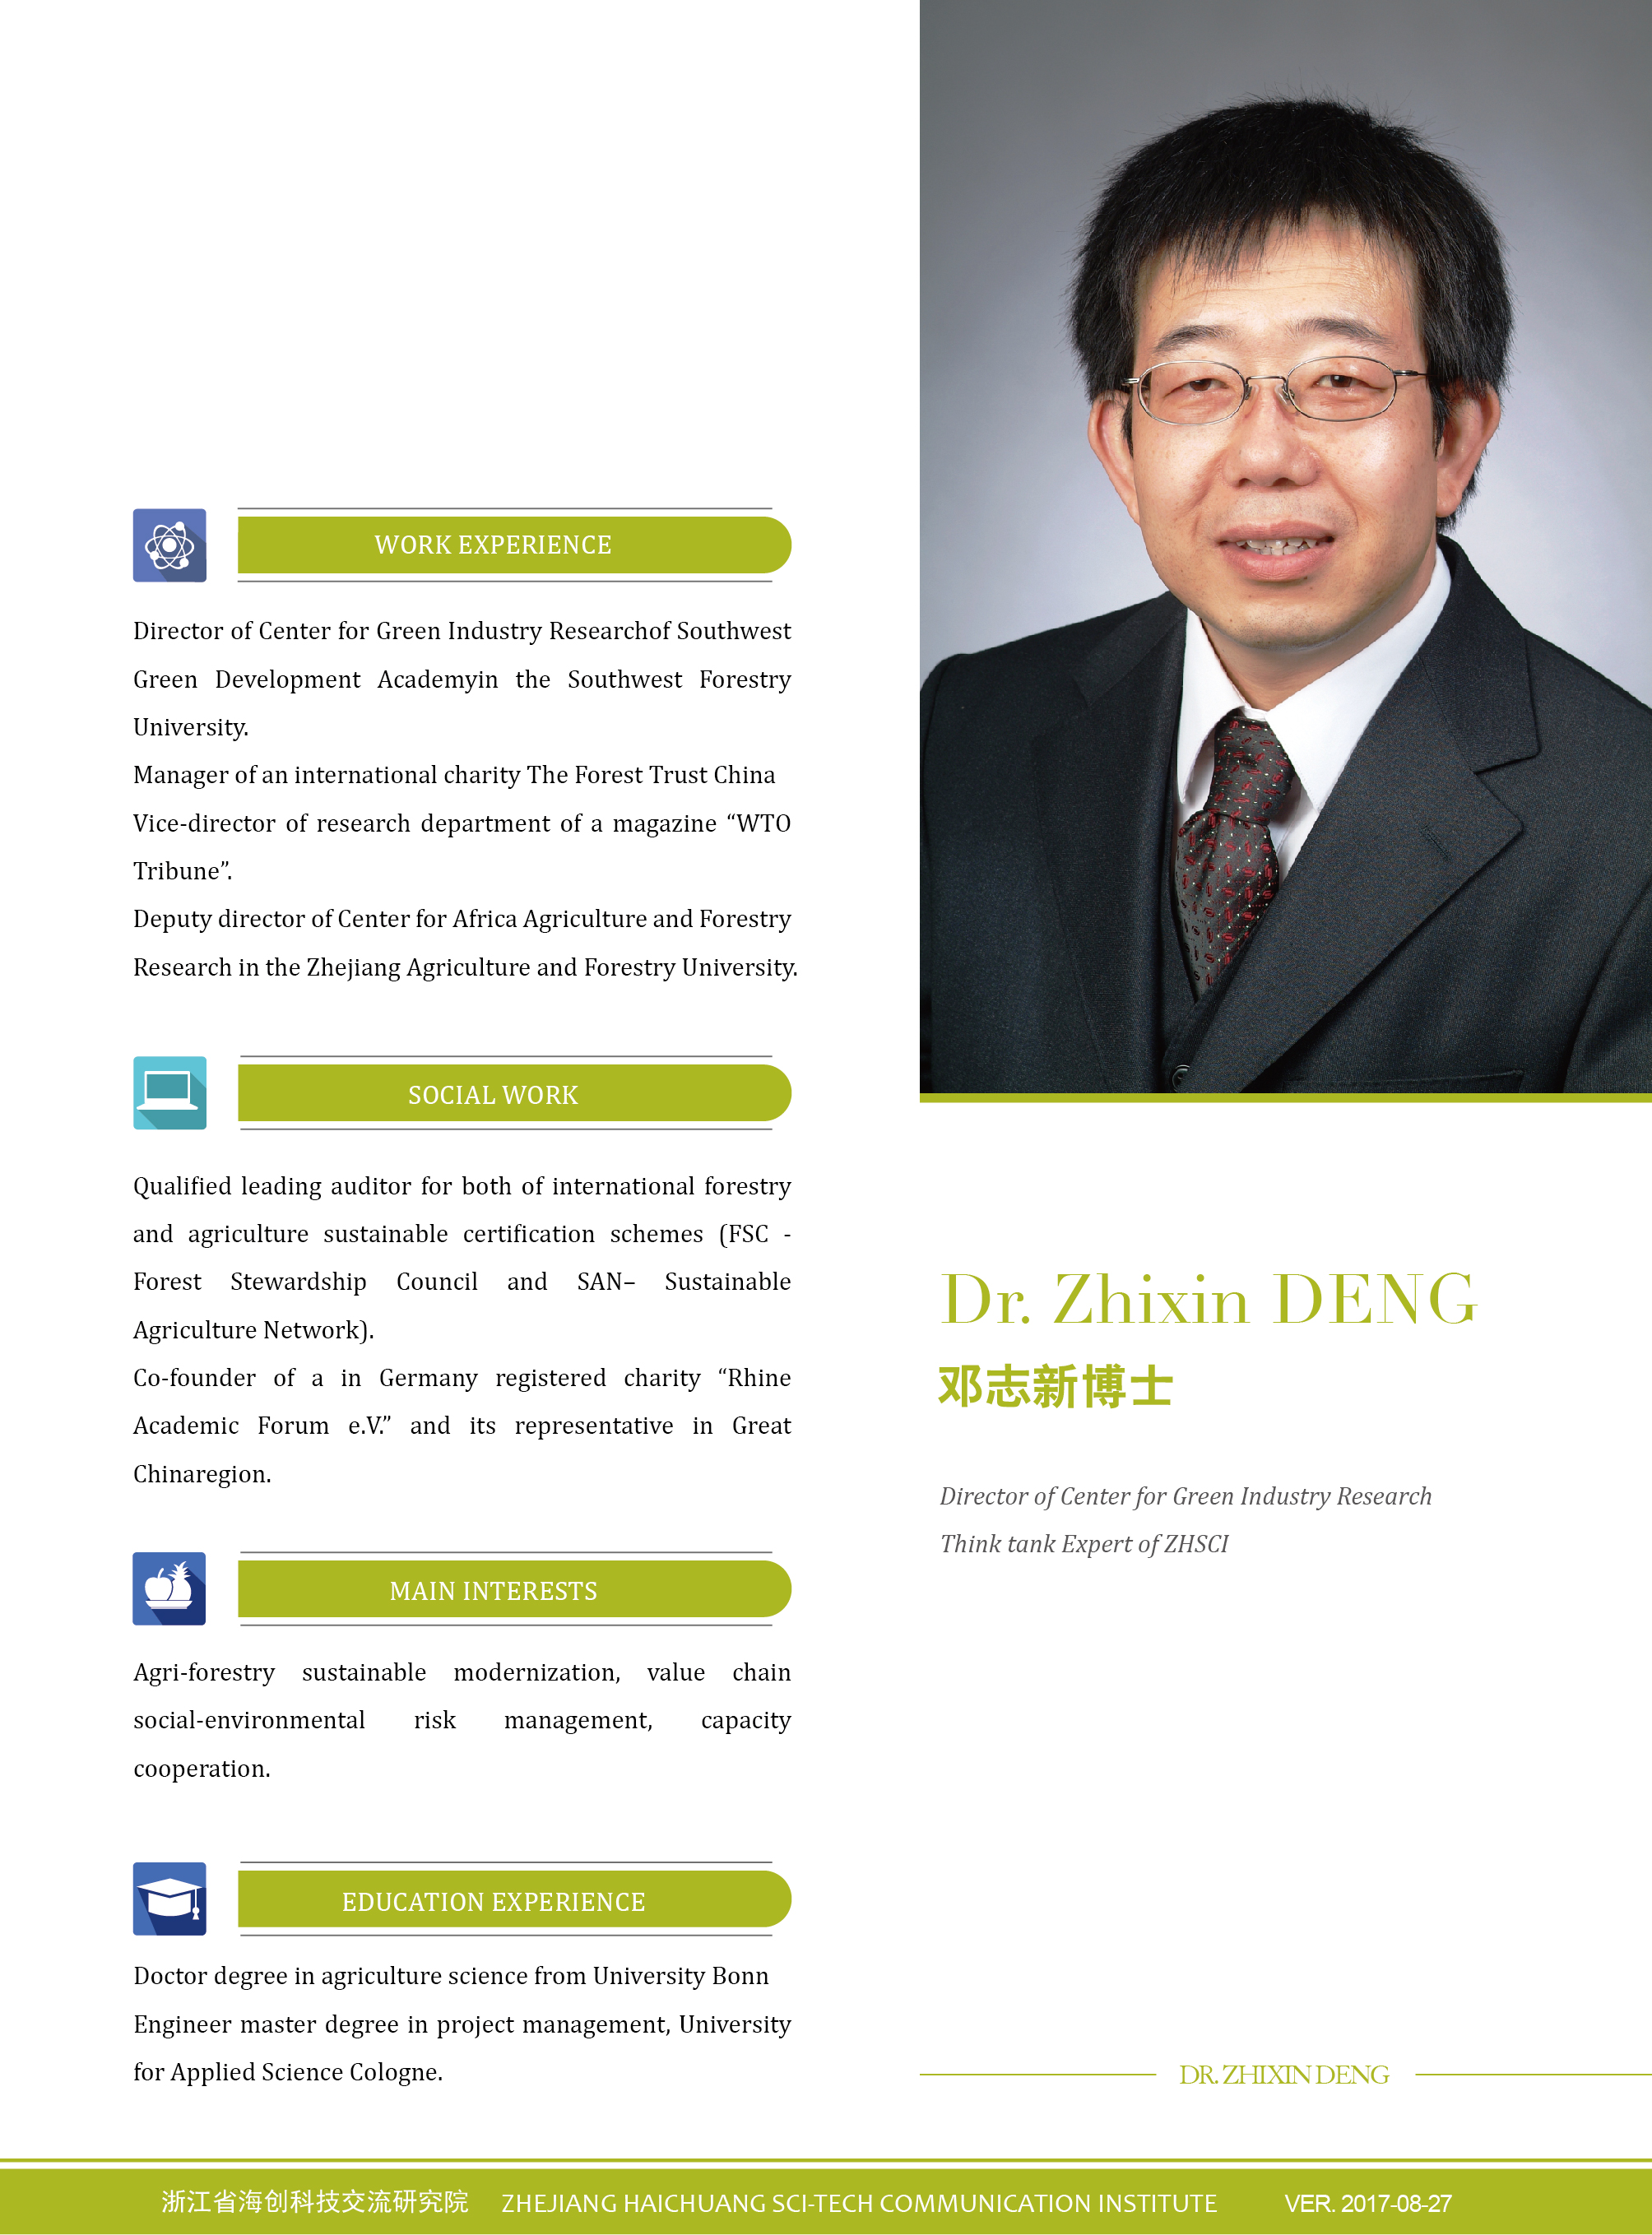 Dr. Zhixin DENG,  Think tank Expert of ZHSCI, Director of Center for Green Industry Research